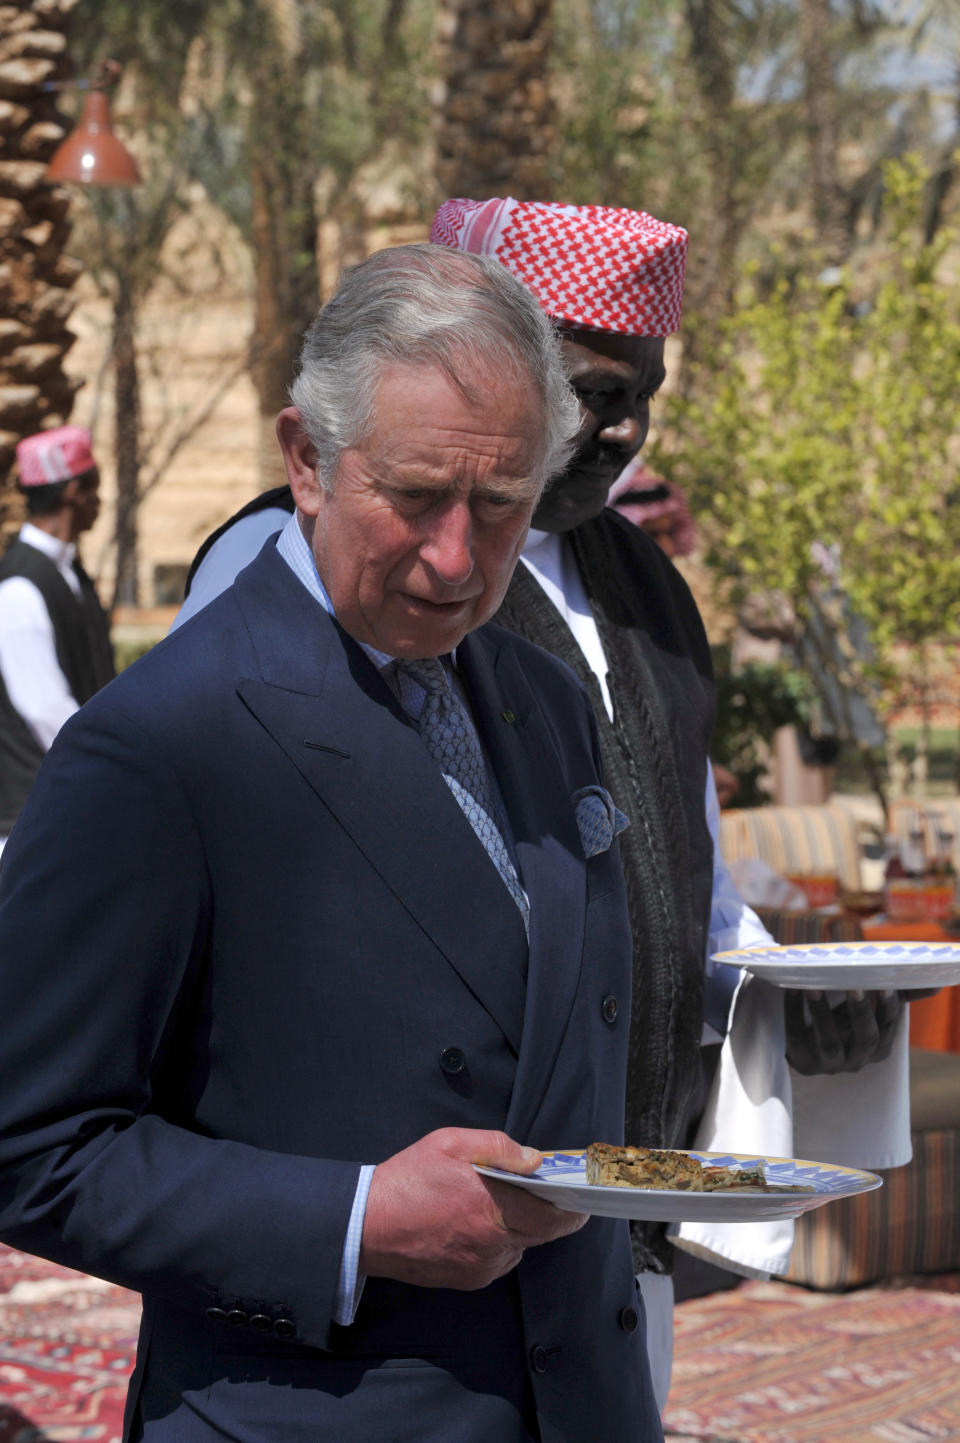 Britain's Prince Charles holds a plate in front of a buffet during a lunch break on February 19, 2014 as part of a visit at an historical site in al-Diriyah on the northwestern outskirts of the Saudi capital, Riyadh. Charles is in Saudi Arabia on a private visit.  AFP PHOTO/ POOL / FAYEZ NURELDINE (Photo by Fayez Nureldine / POOL / AFP) (Photo by FAYEZ NURELDINE/POOL/AFP via Getty Images)